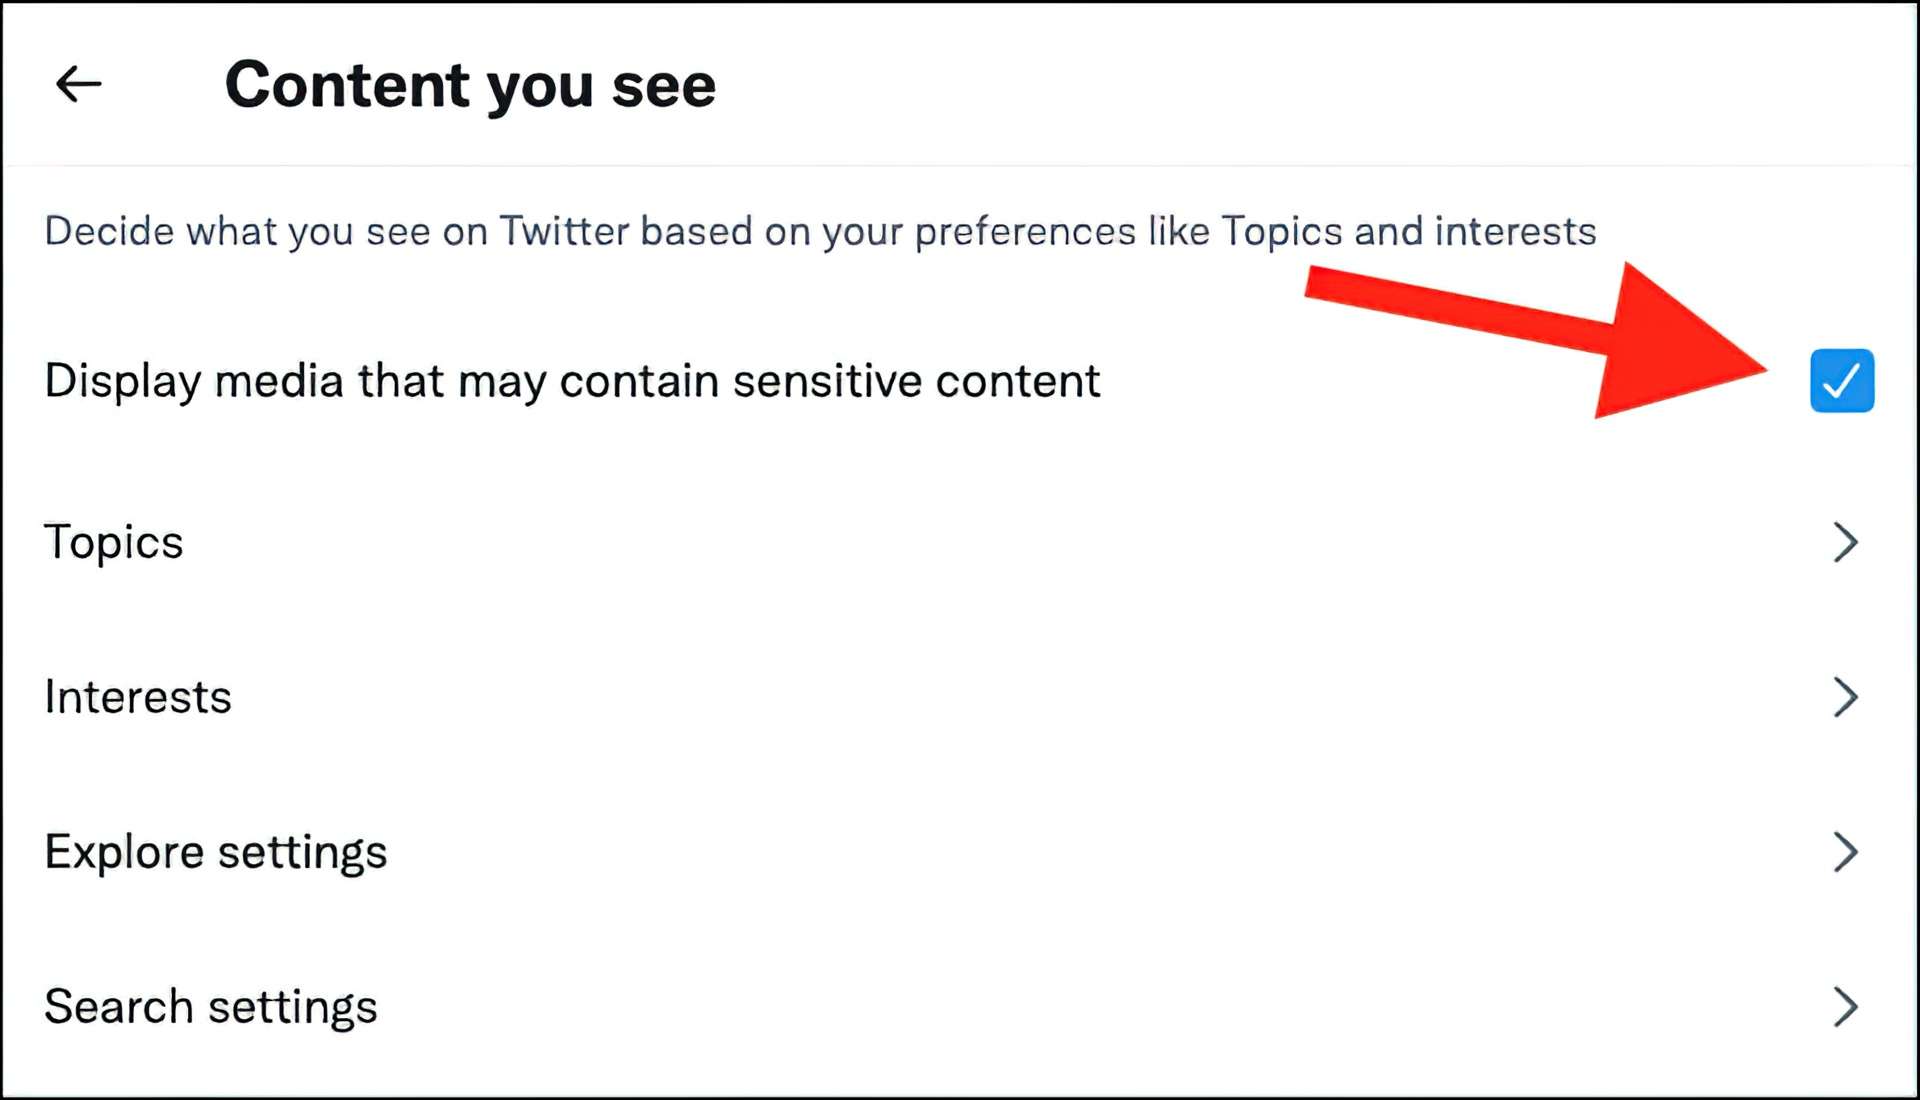 How to allow sensitive content on Twitter?